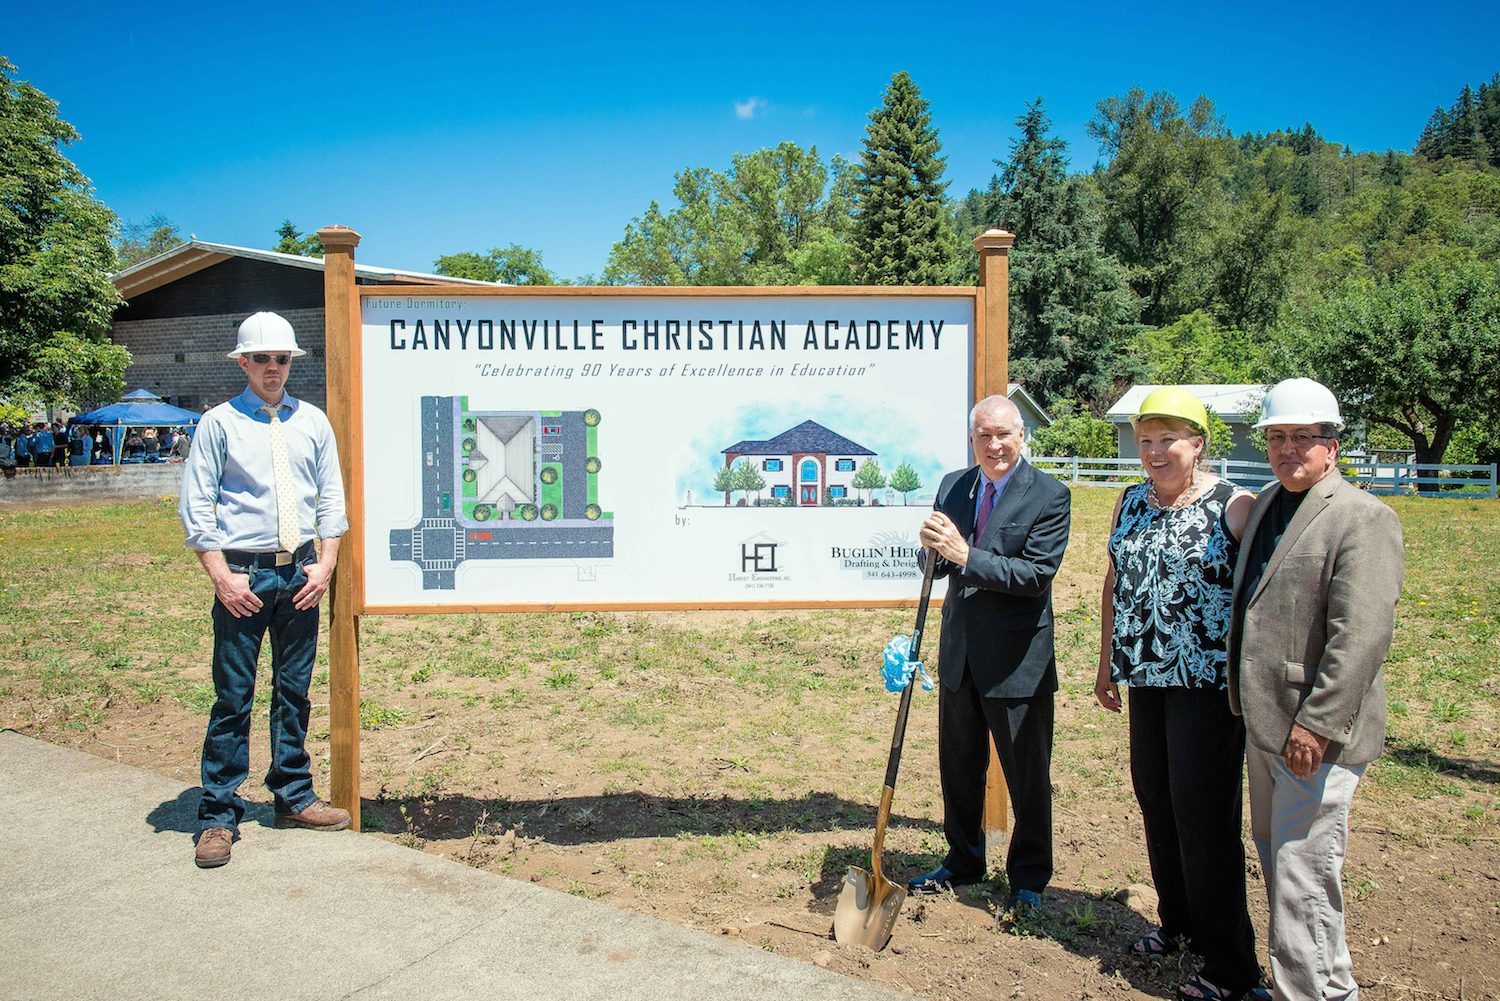 Historical Groundbreaking at Canyonville Christian Academy